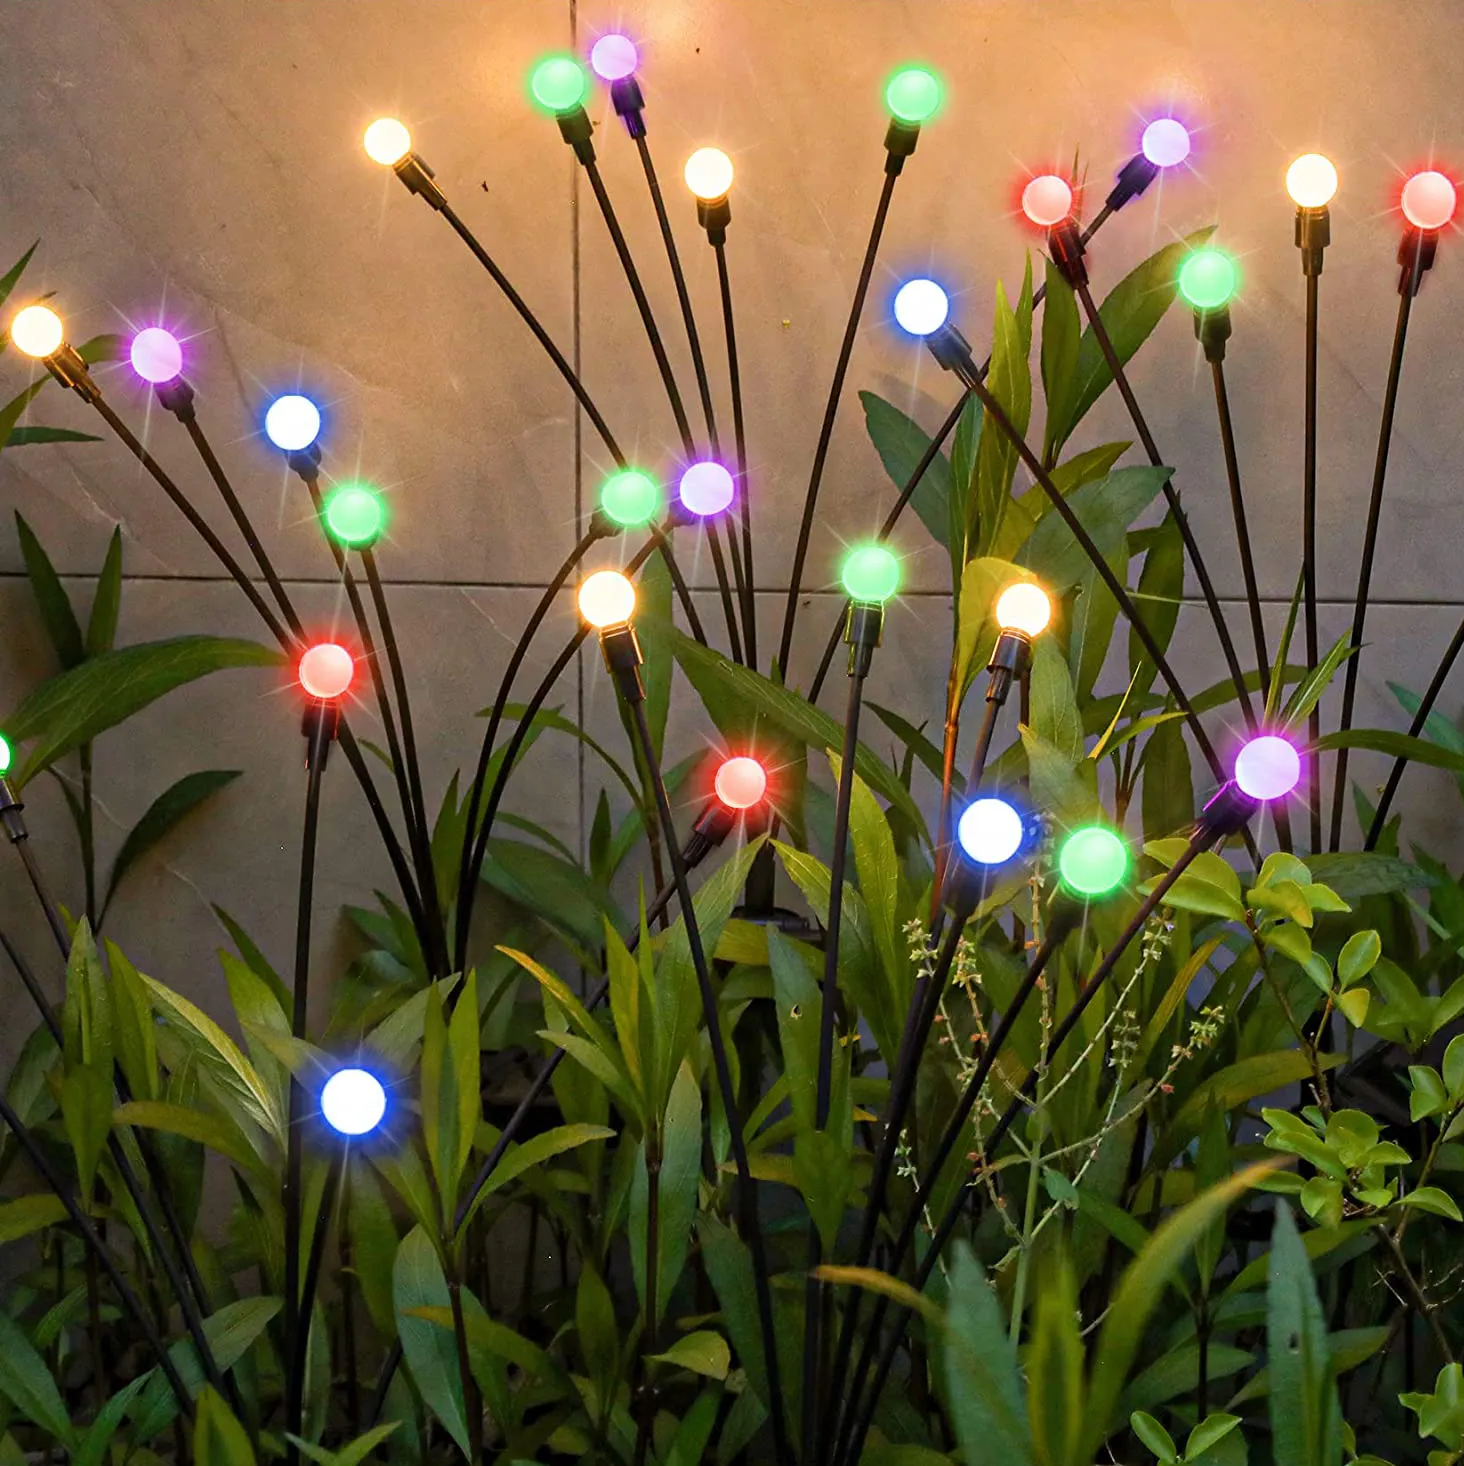 Decorative Solar Powered Garden Lights Firefly Lights on a Stick Swaying by Wind for Yard Patio Pathway Decoration Light